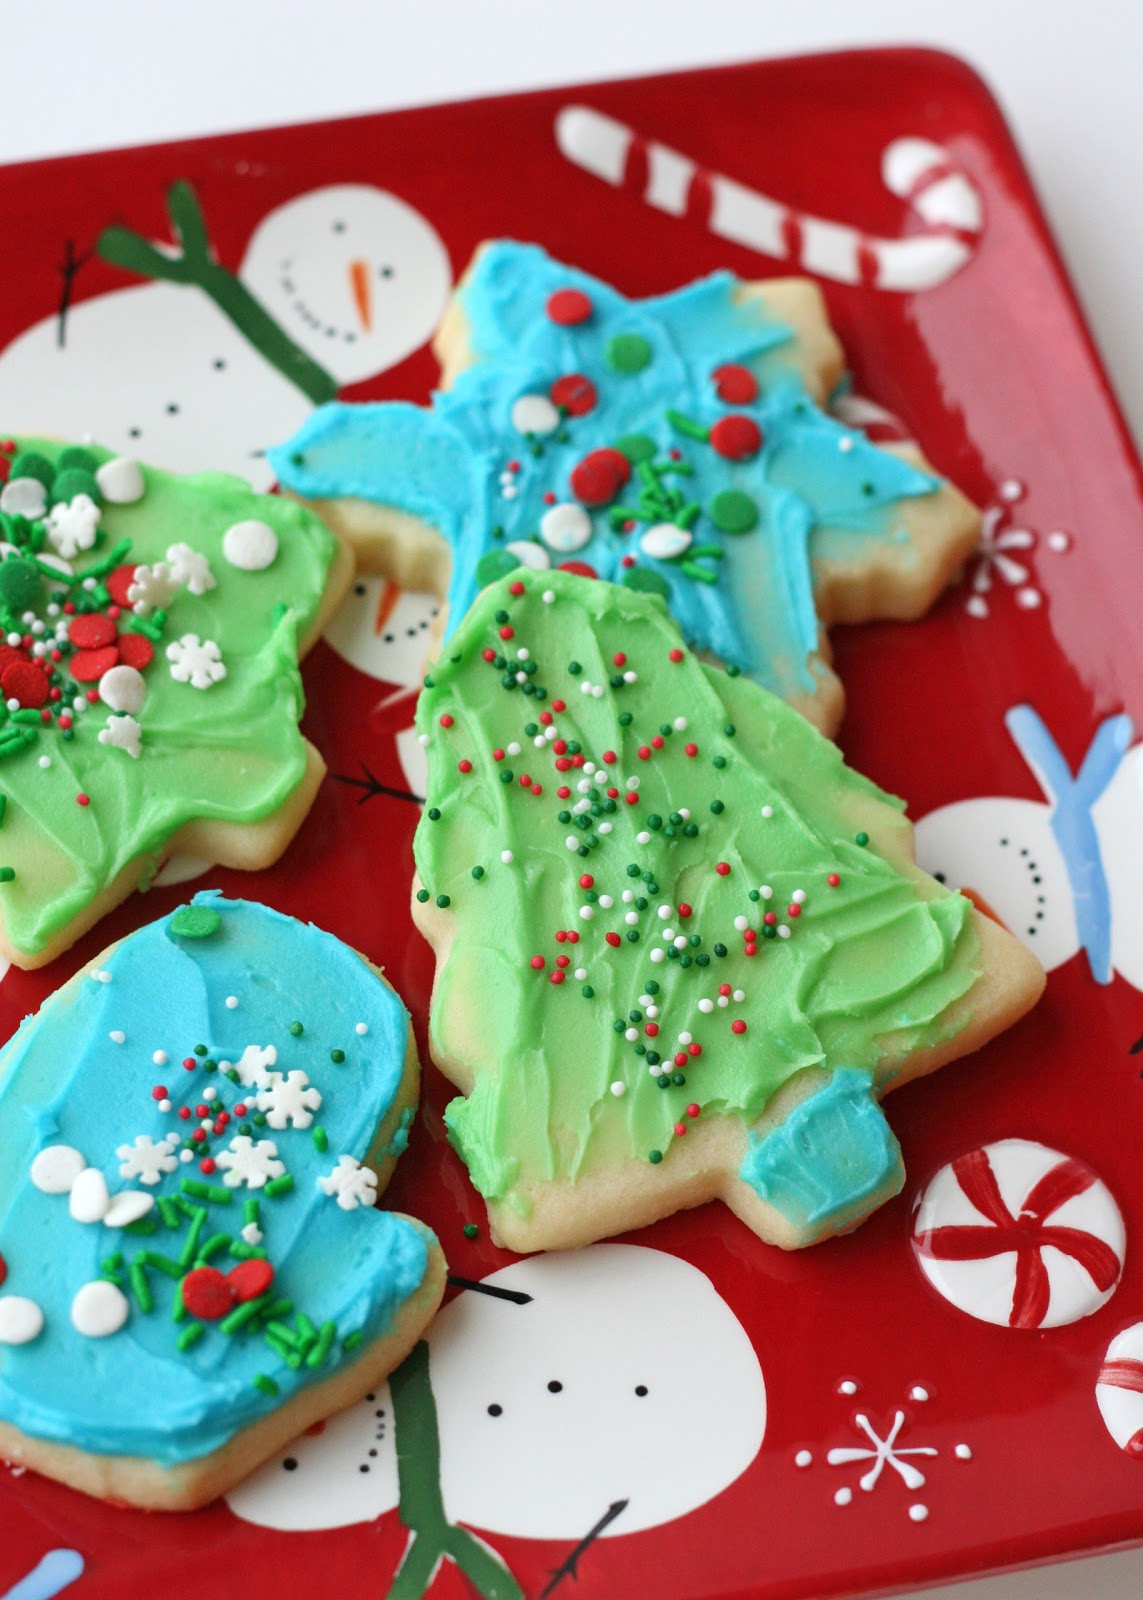 Easy Decorative Christmas Cookies
 Cookie Decorating Kits for Kids and Easy Butter Frosting